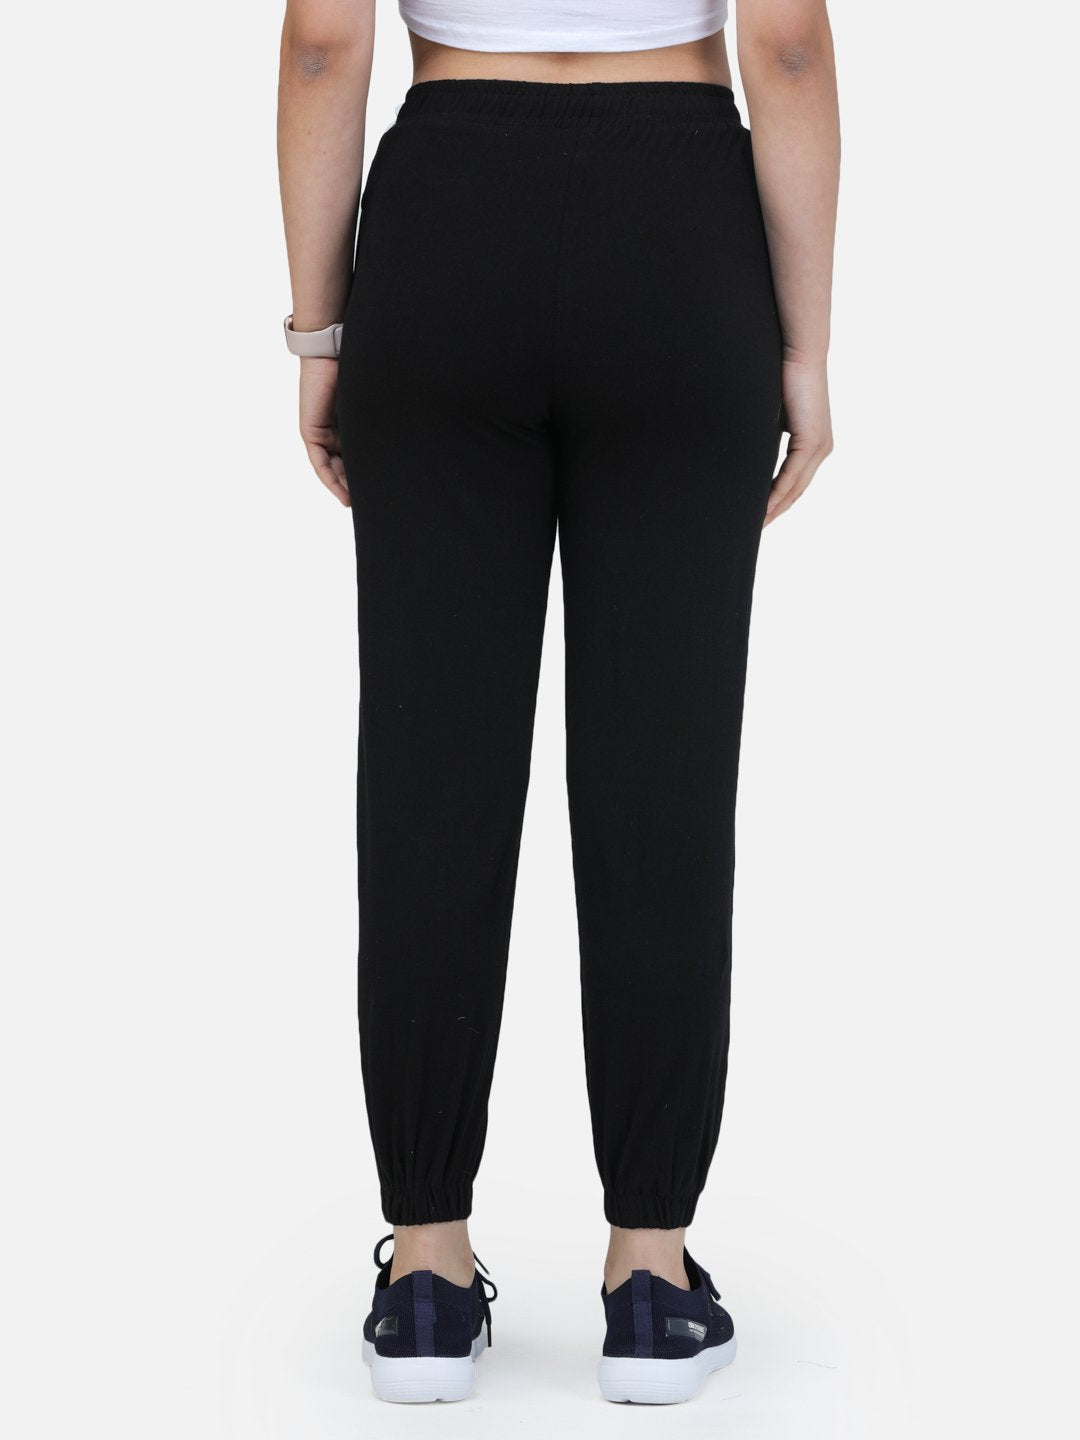 SCORPIUS BLACK TRACKPANT WITH WHITE STRAP